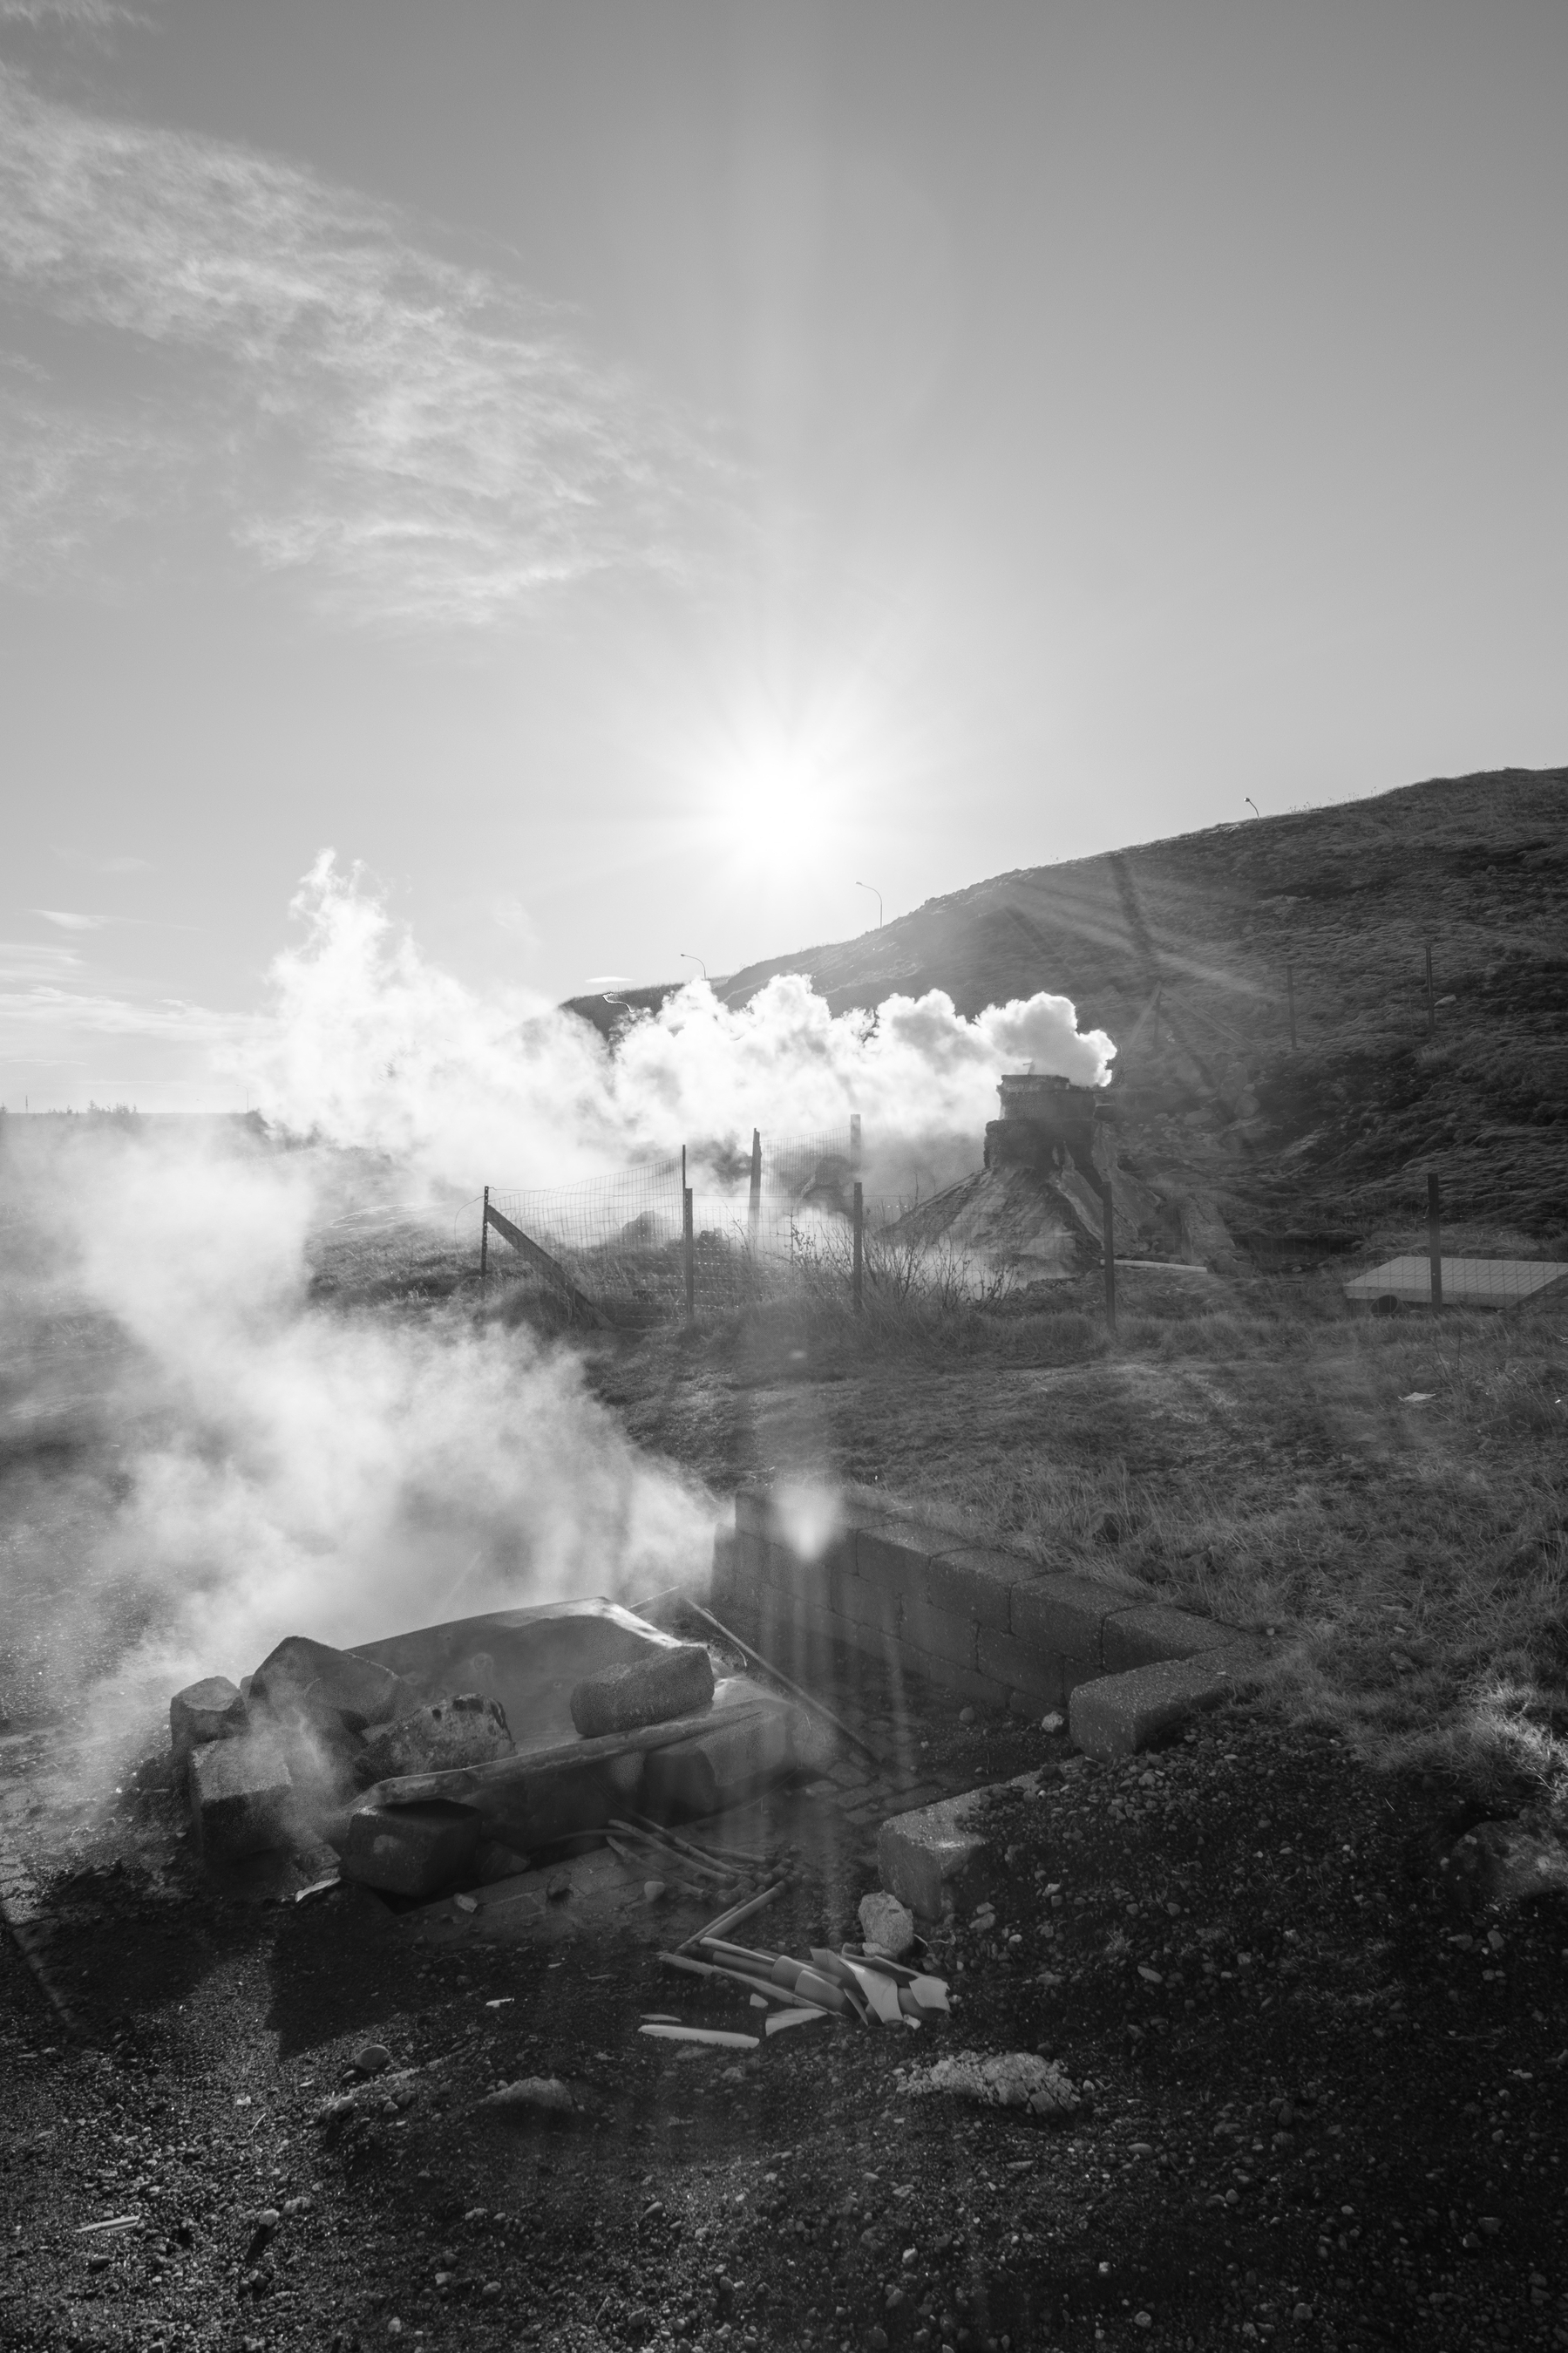 Some of the vents installed in the geothermally active area that Hveragerði is built on and where the town gets its name. “Hveragerði” lit. town of geysers.